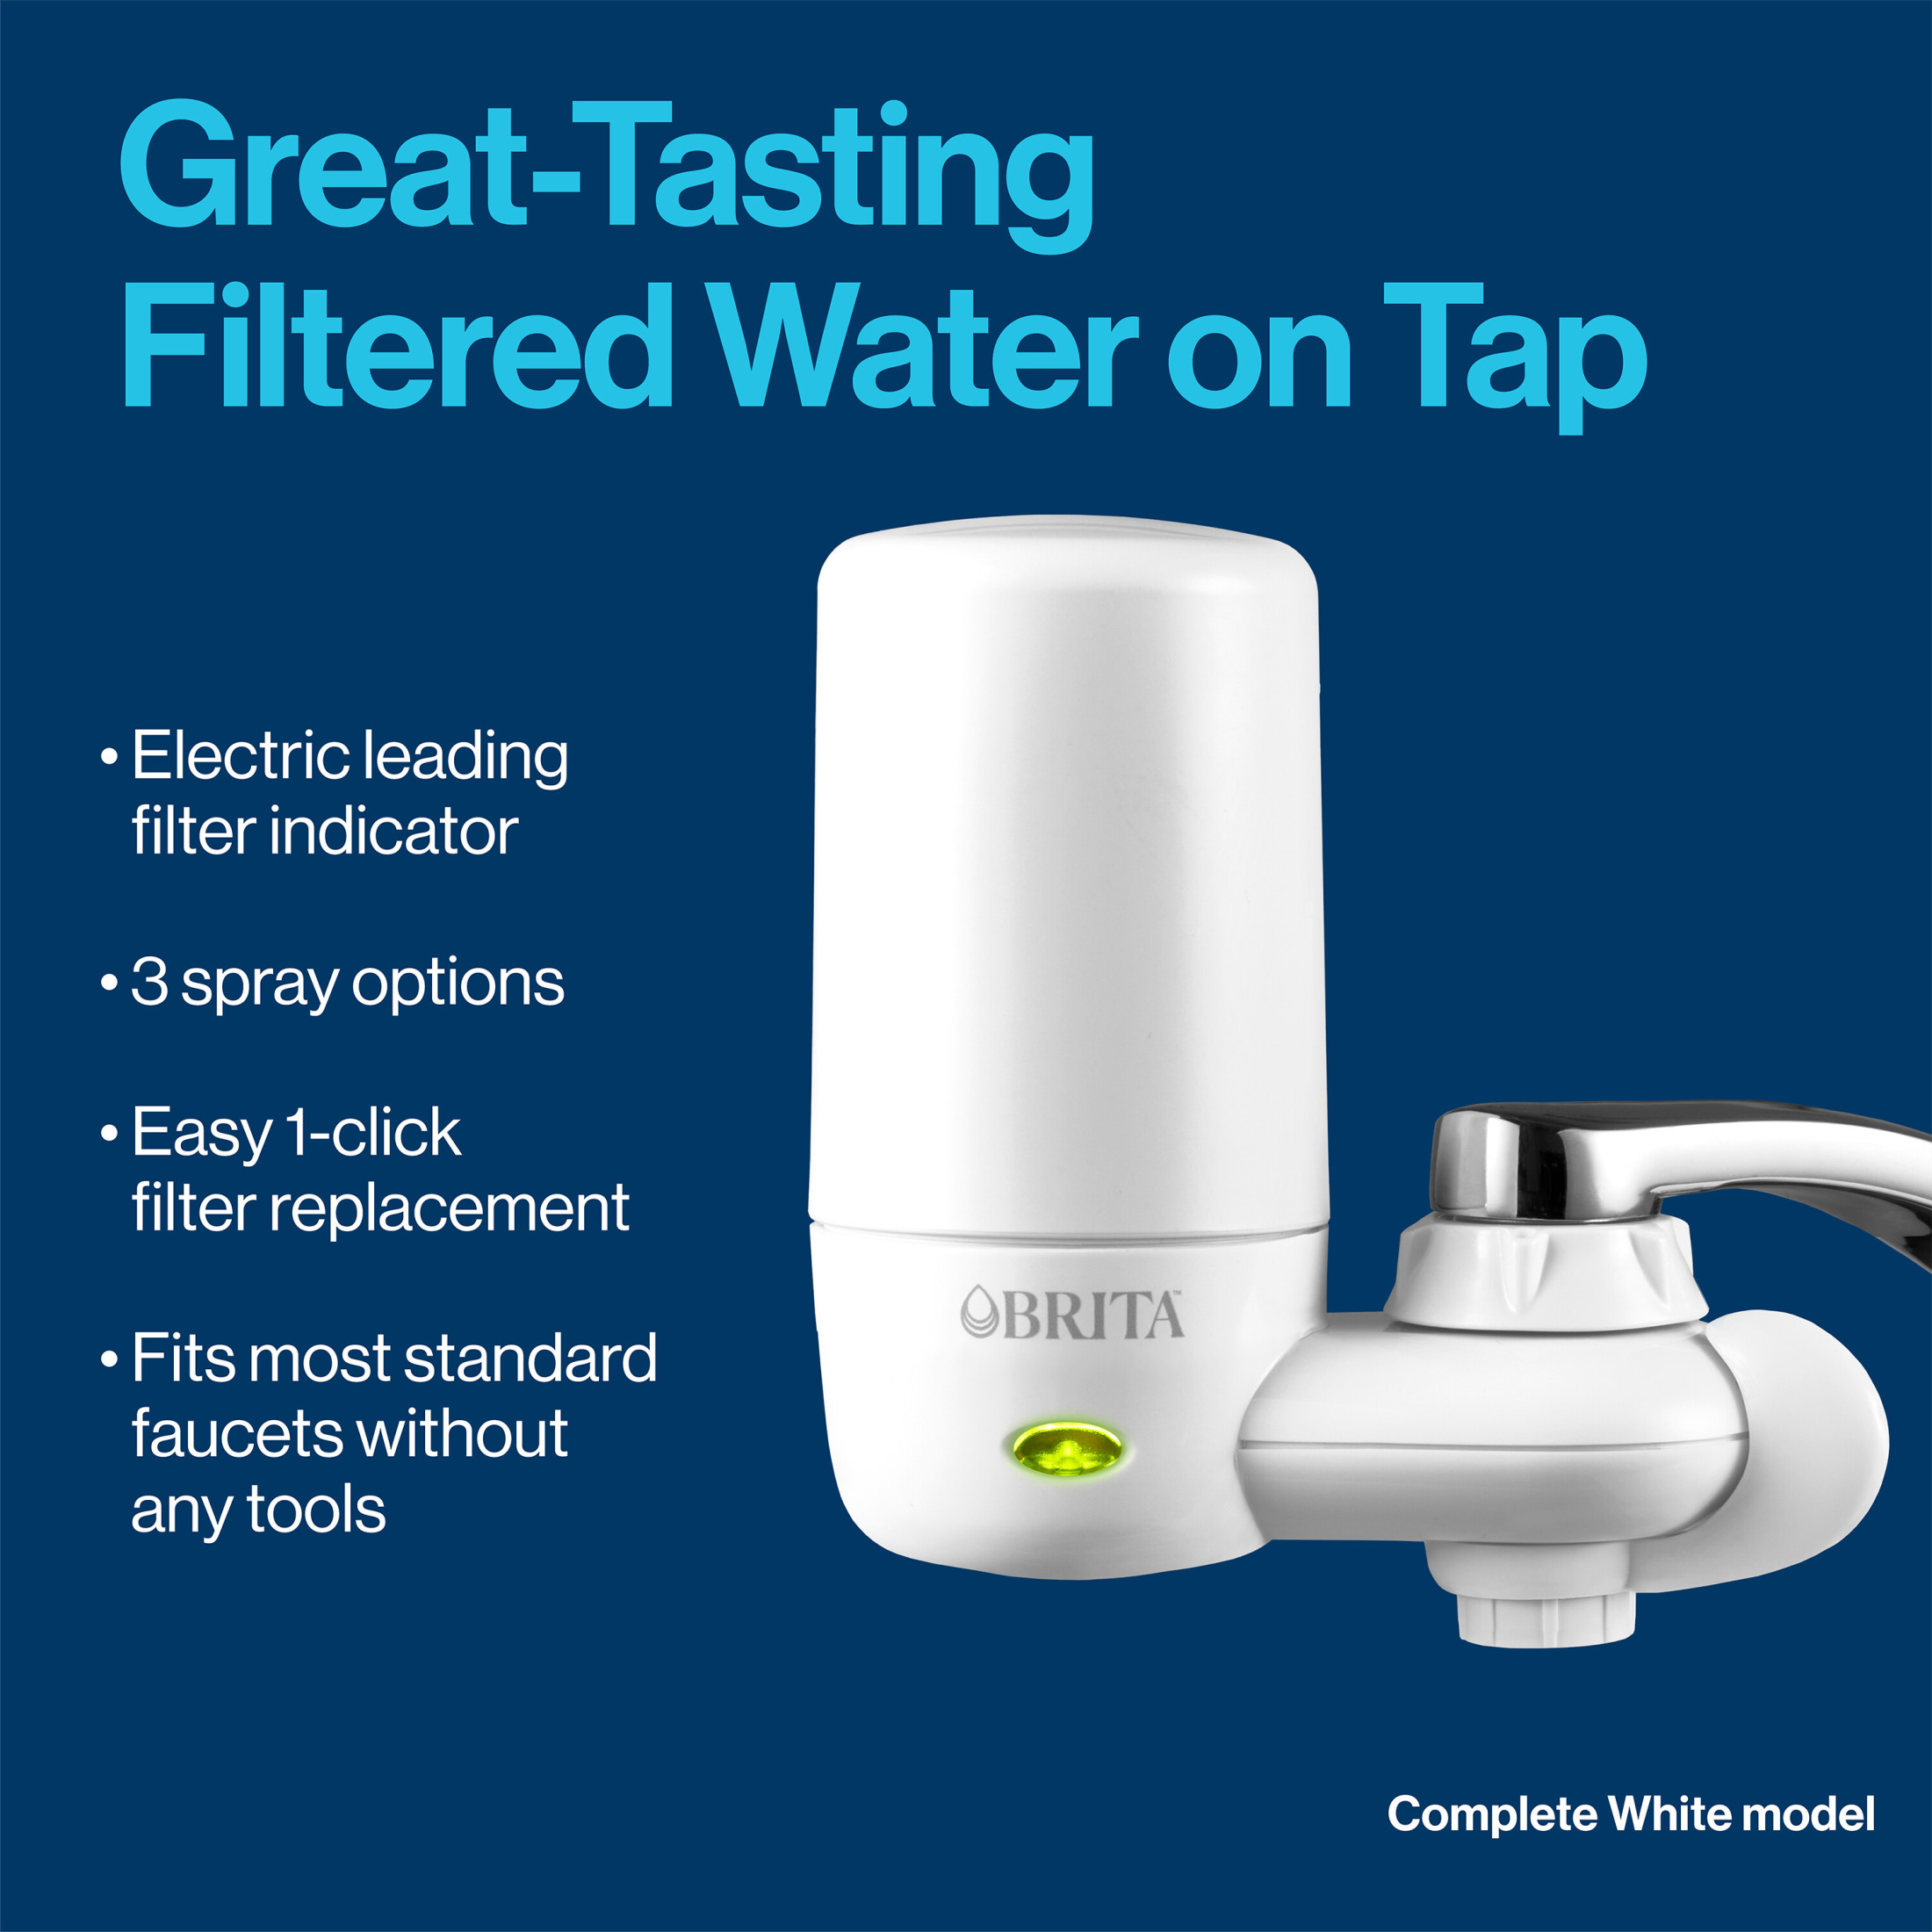 Brita Elite Water Faucet Filtration Mount System, Fits Standard Faucets, White, Includes 2 Filters - image 4 of 8